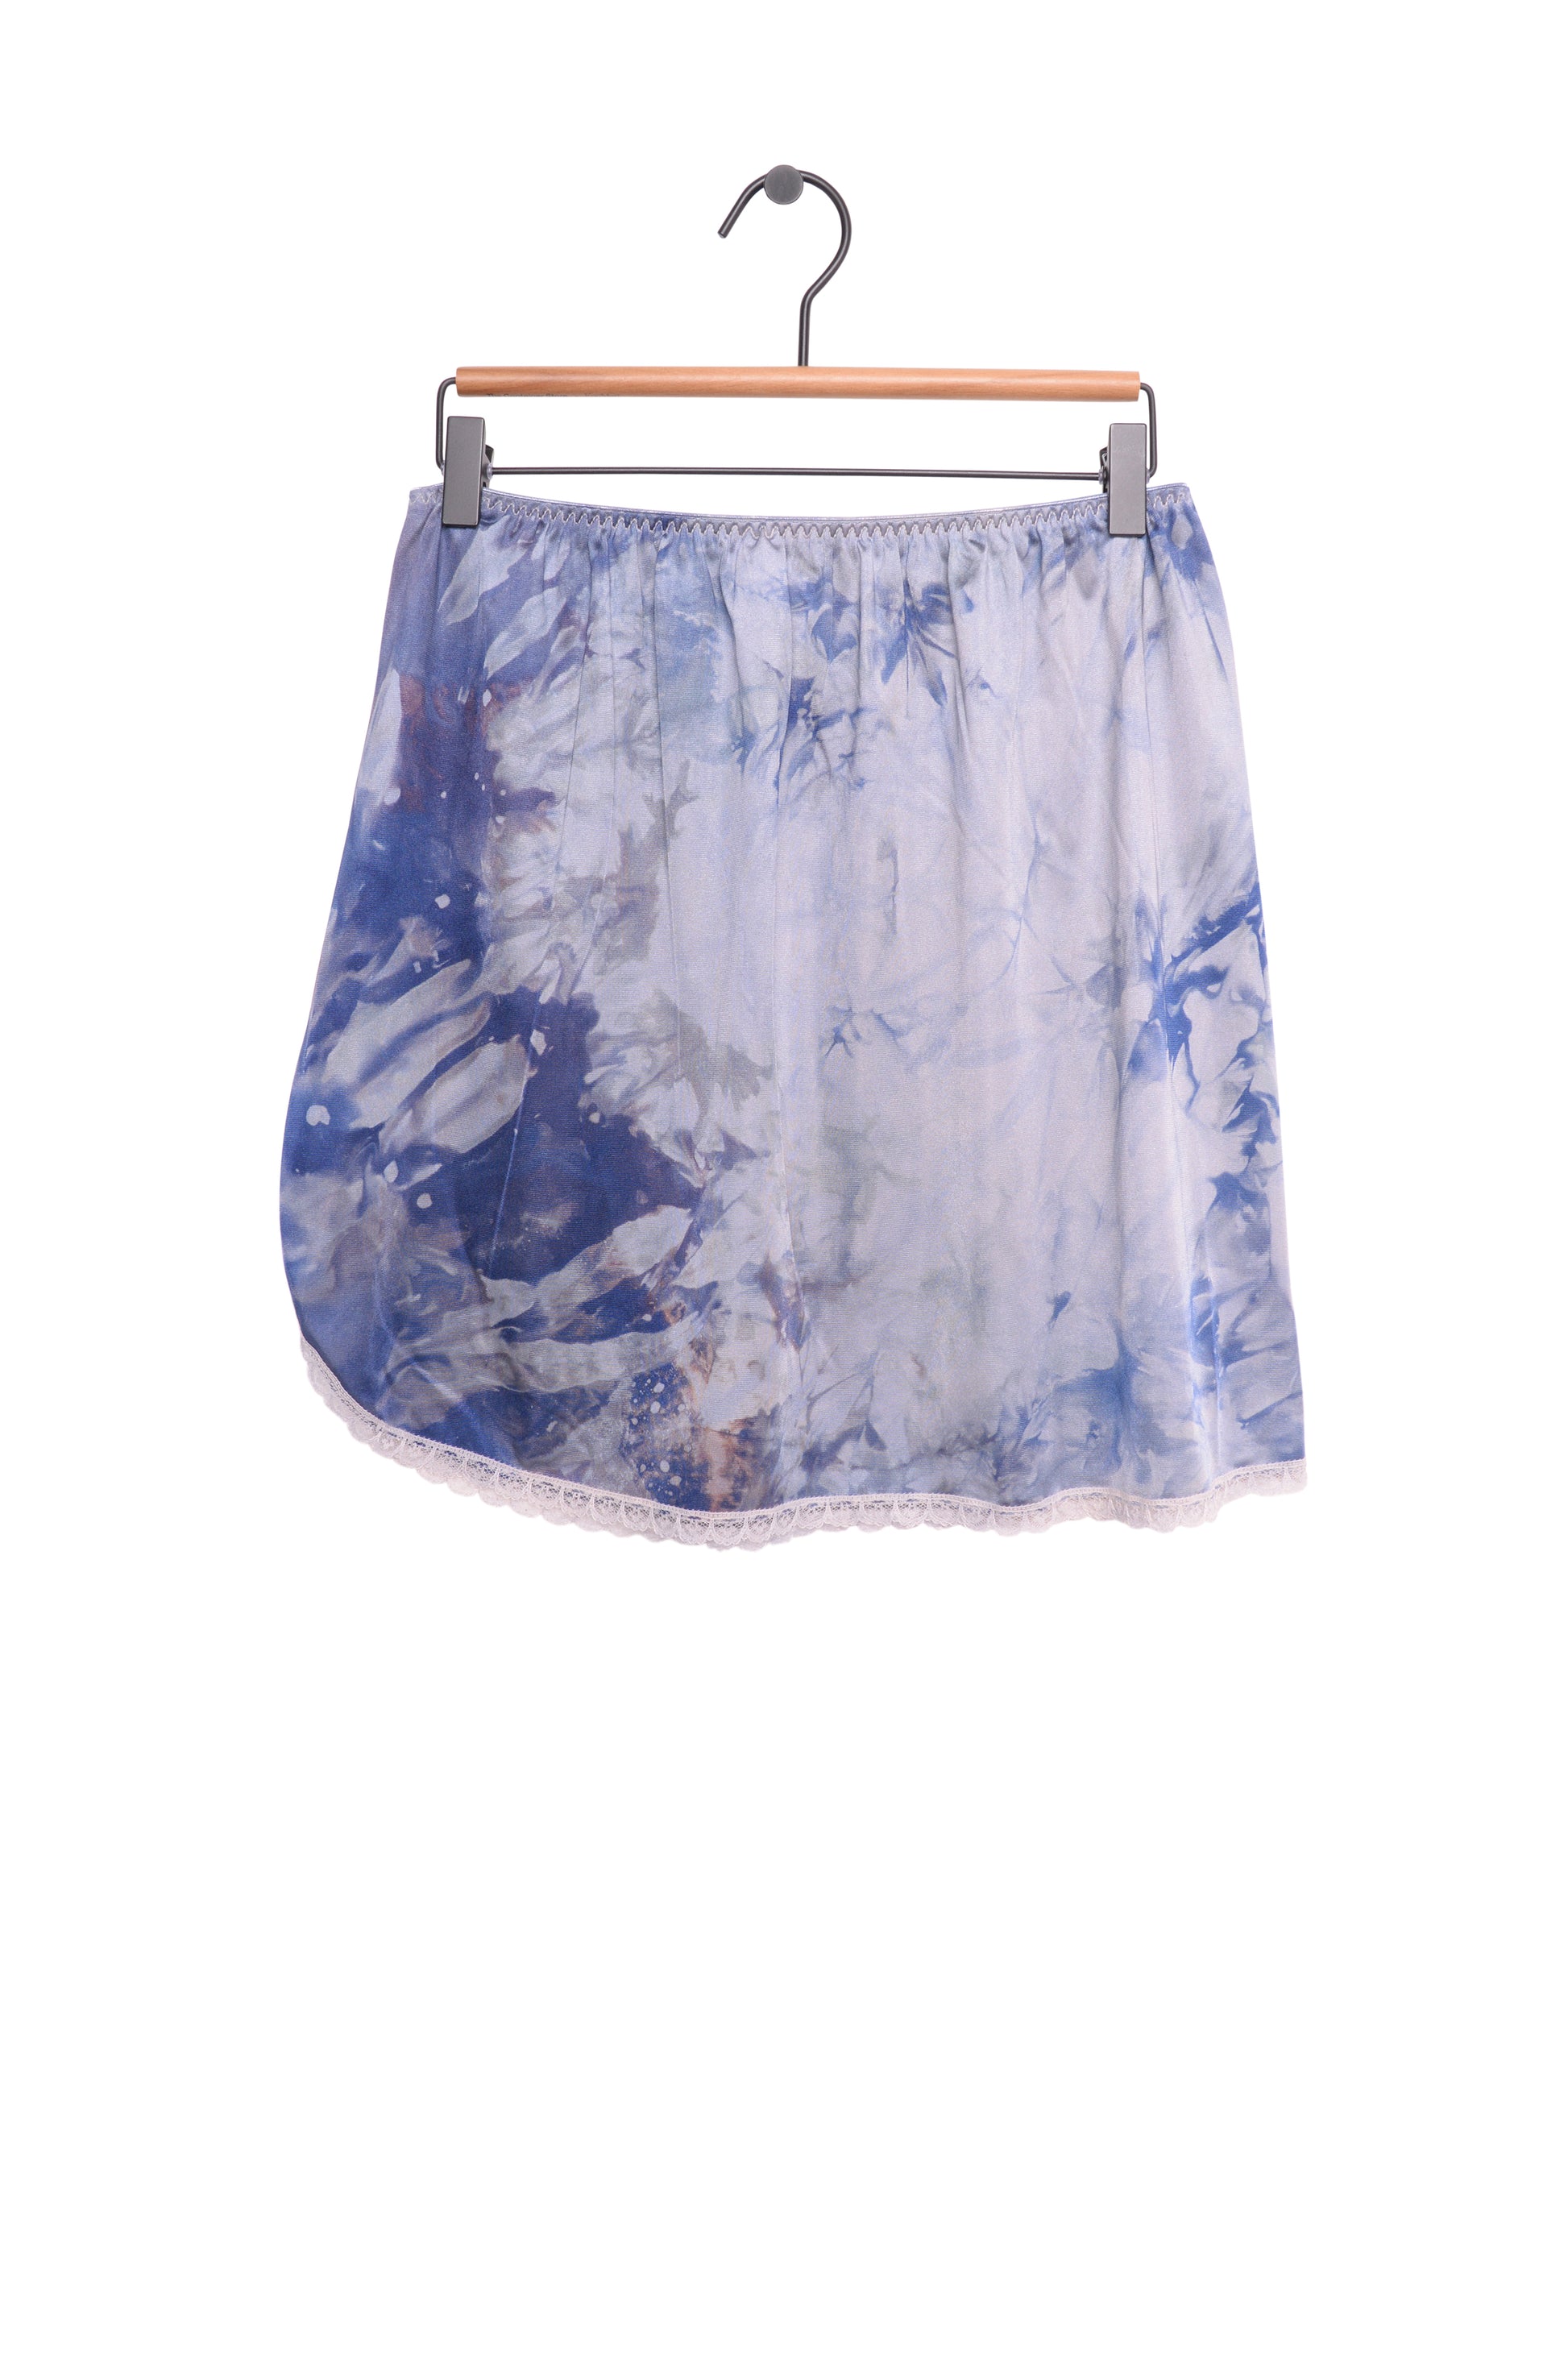 Hand-Dyed Mini Slip Skirt Free Shipping - The Vintage Twin